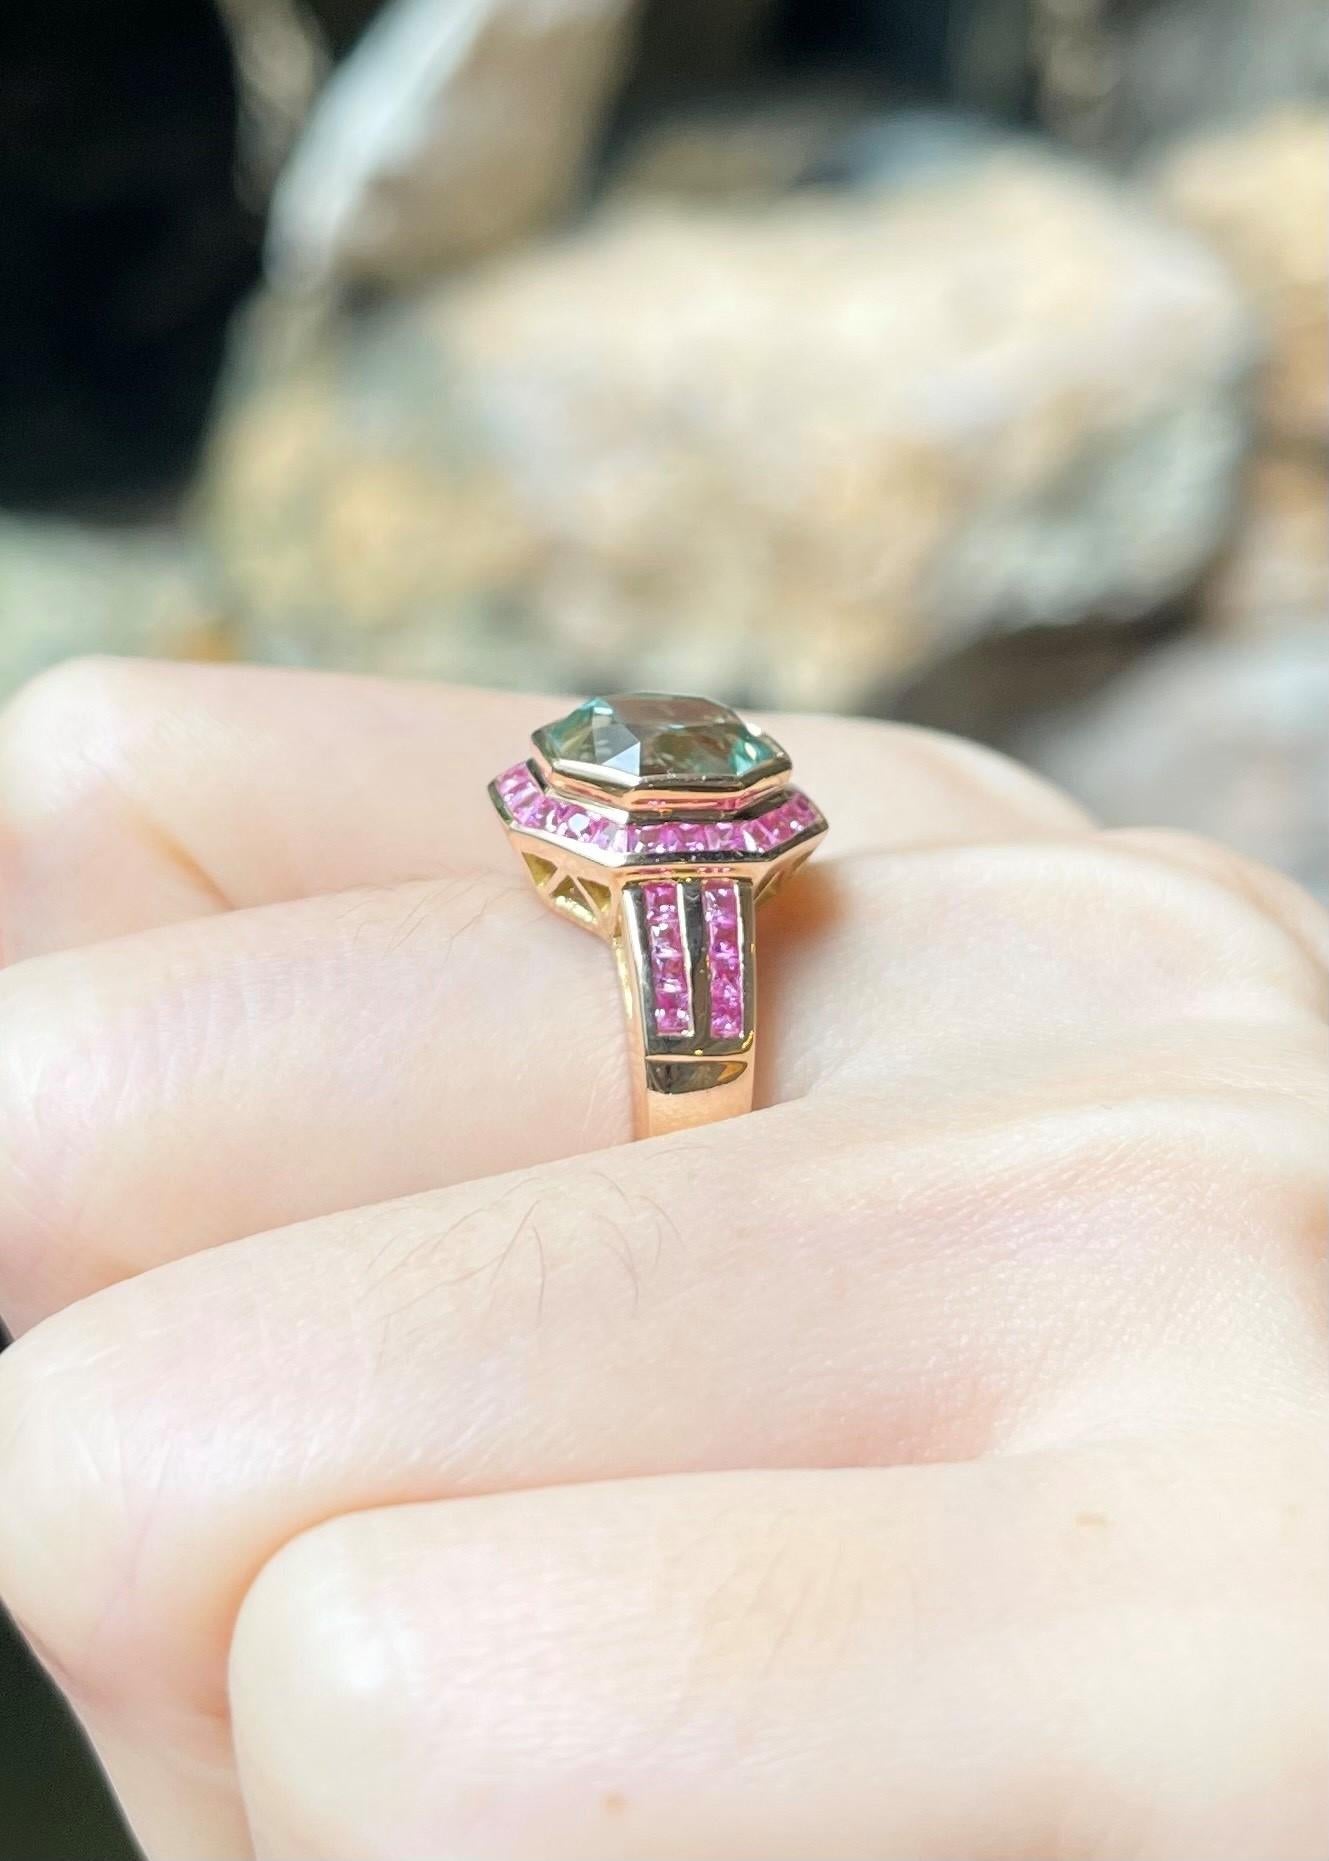 Green Tourmaline 4.34 carats with Pink Sapphire 1.36 carats Ring set in 18K Rose Gold Settings
(GIA Certified)

Width:  1.2 cm 
Length: 1.3 cm
Ring Size: 53
Total Weight: 8.42 grams

